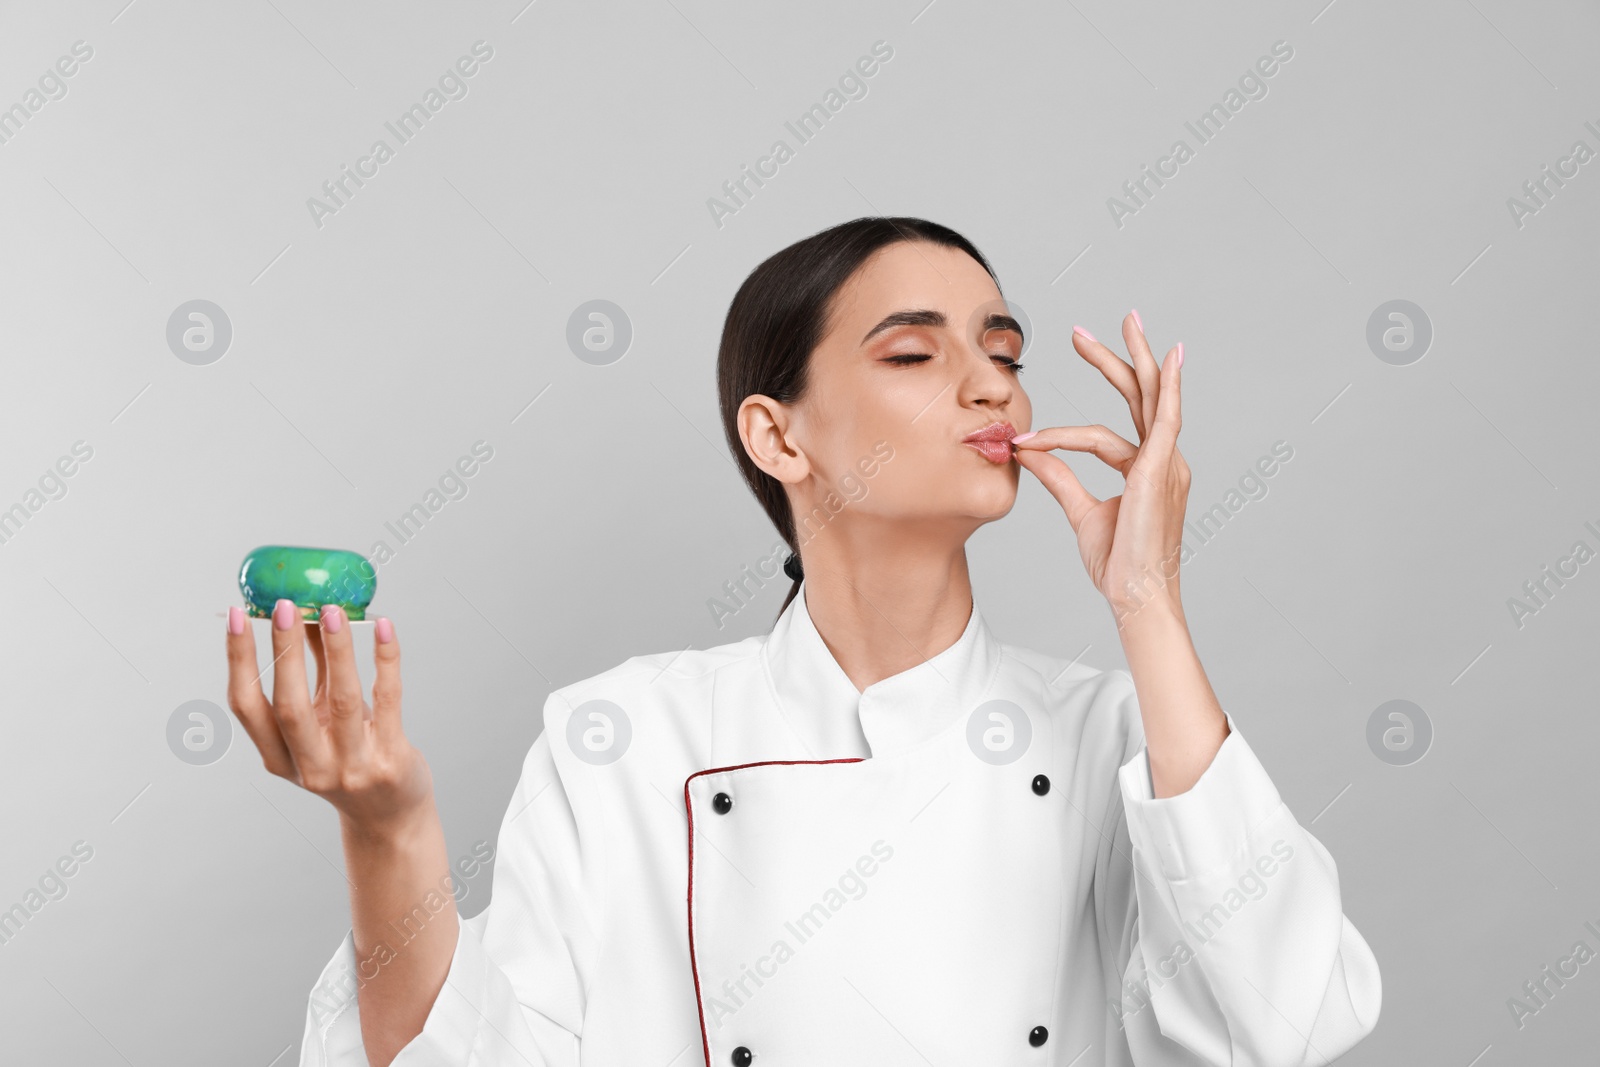 Photo of Professional confectioner in uniform with cake showing delicious gesture on light grey background